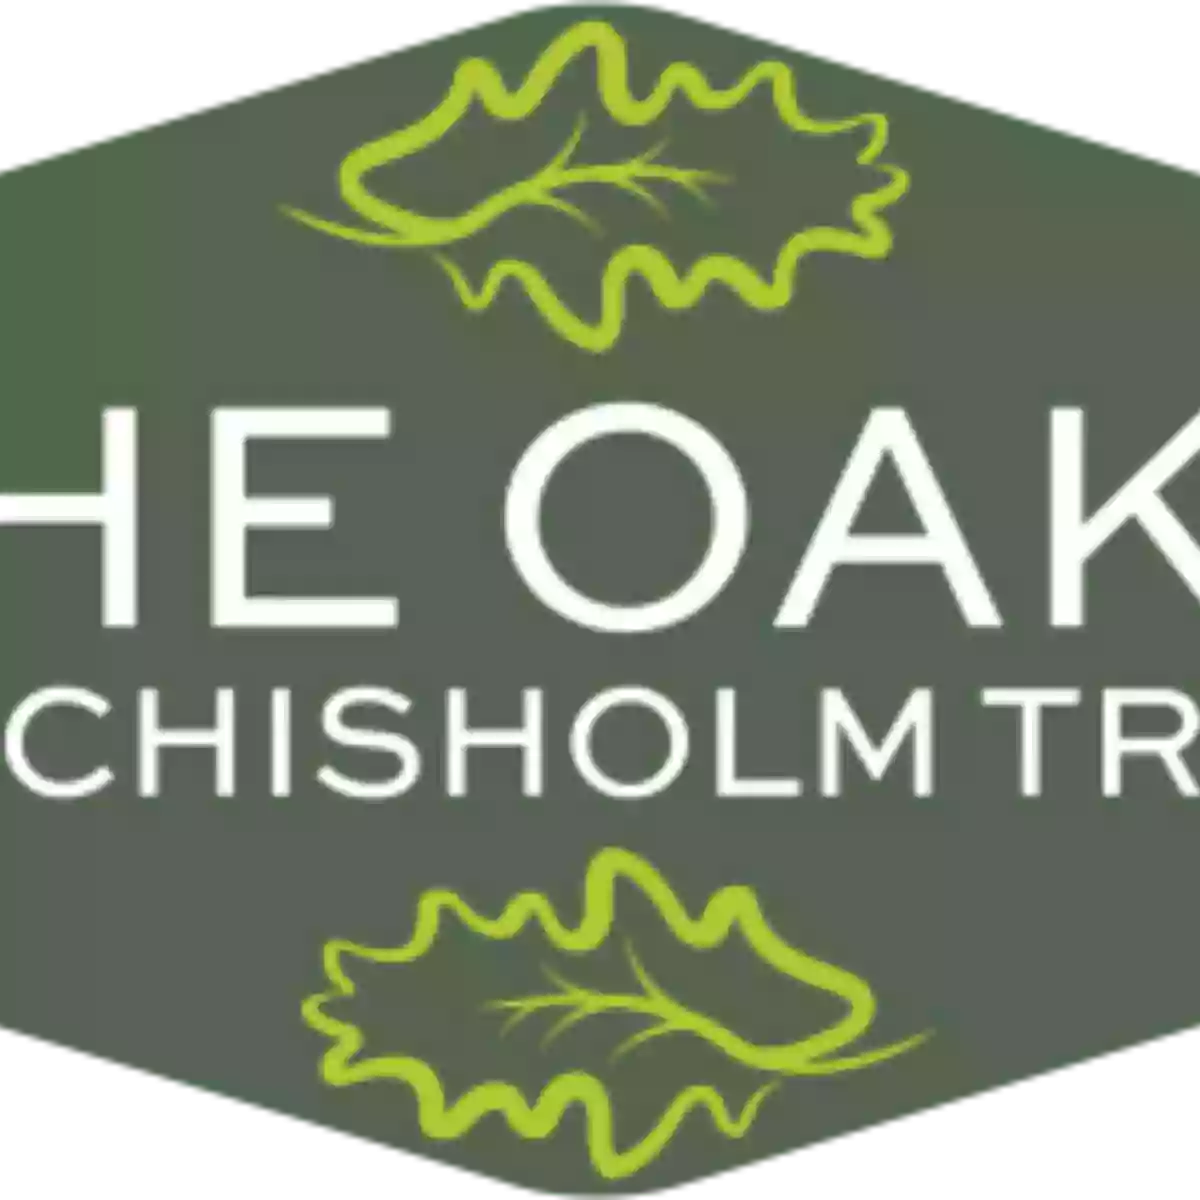 The Oaks on Chisholm Trail